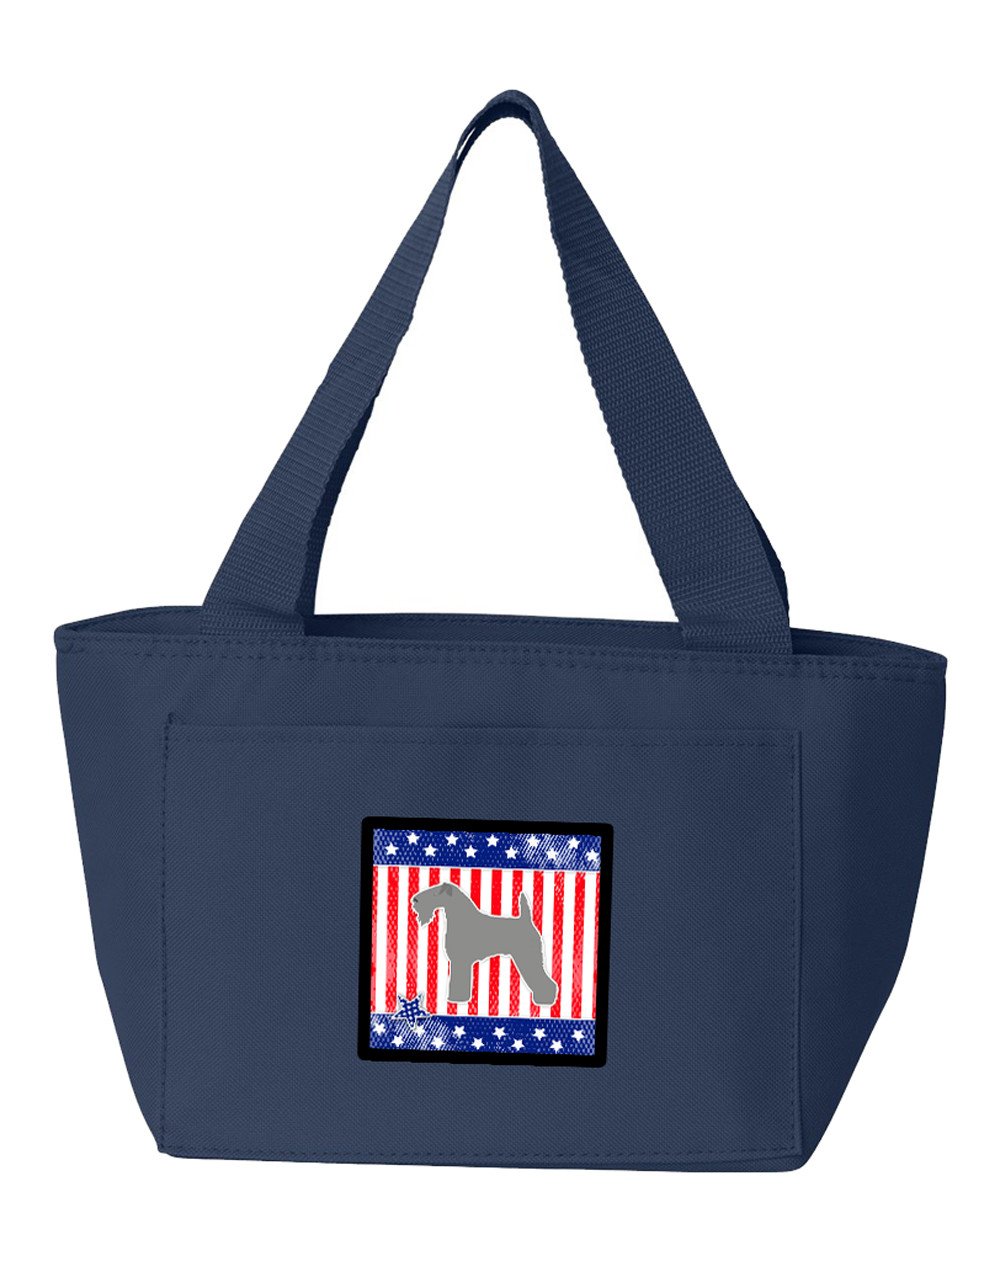 USA Patriotic Kerry Blue Terrier Lunch Bag BB3292NA-8808 by Caroline's Treasures